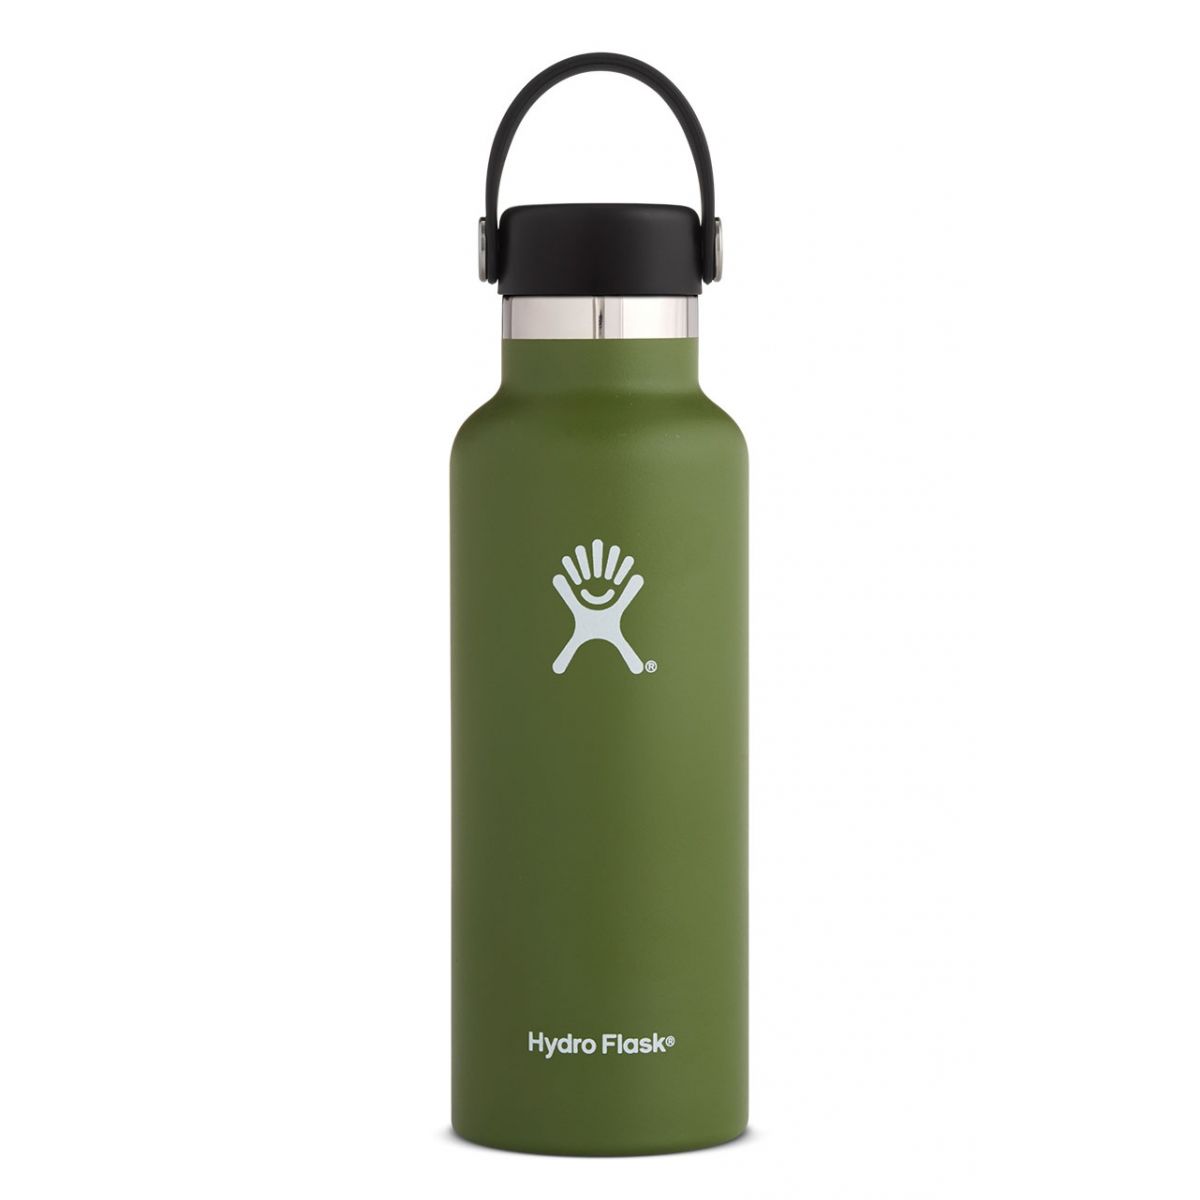 hydroflask 18oz standard mouth in olive